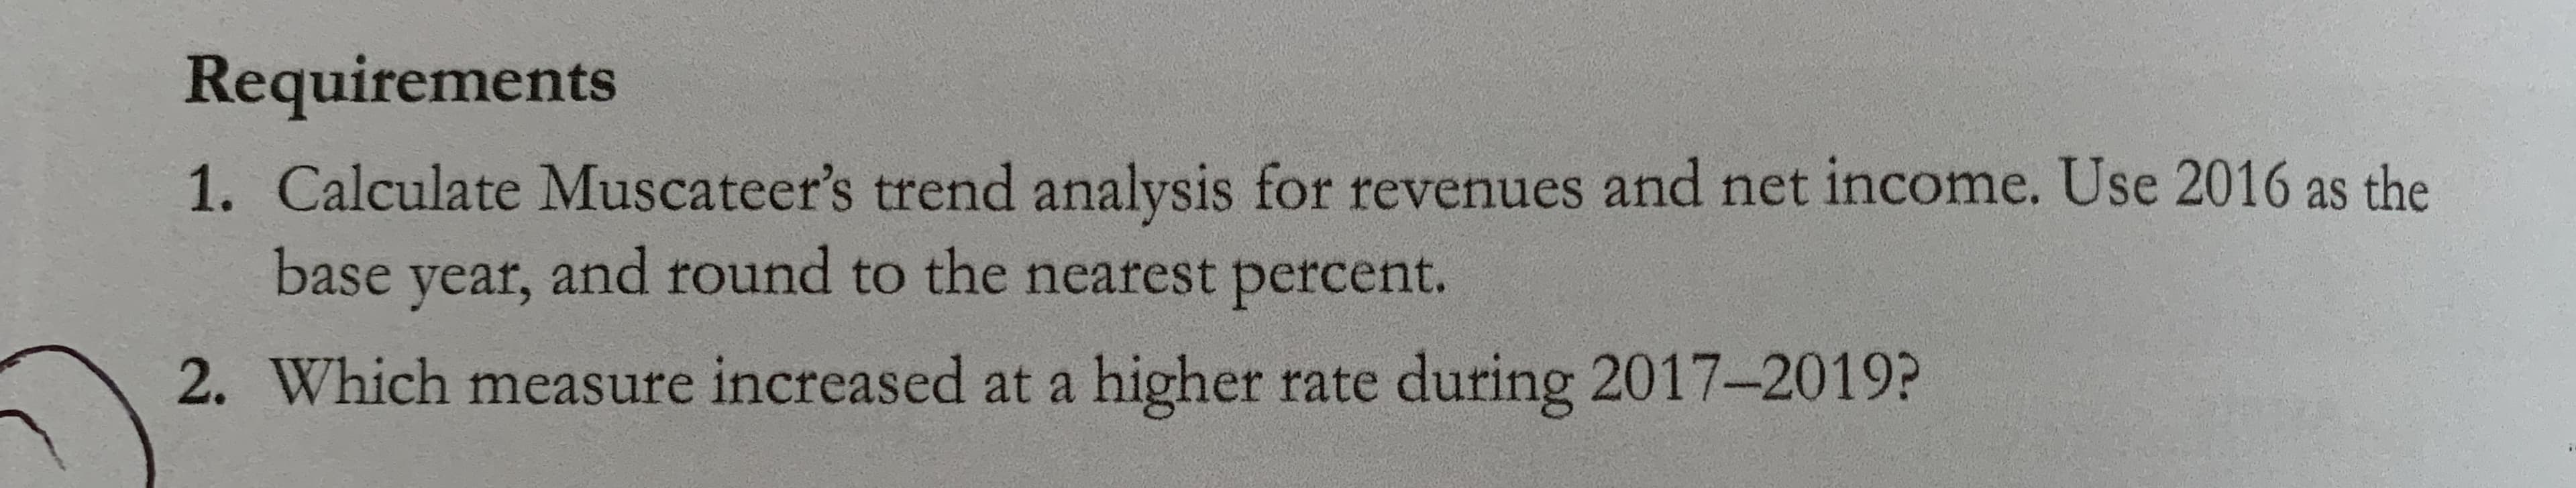 Requirements
1. Calculate Muscateer's trend analysis for revenues and net income. Use 2016 as the
base year, and round to the nearest percent.
2. Which measure increased at a higher rate during 2017-2019?
